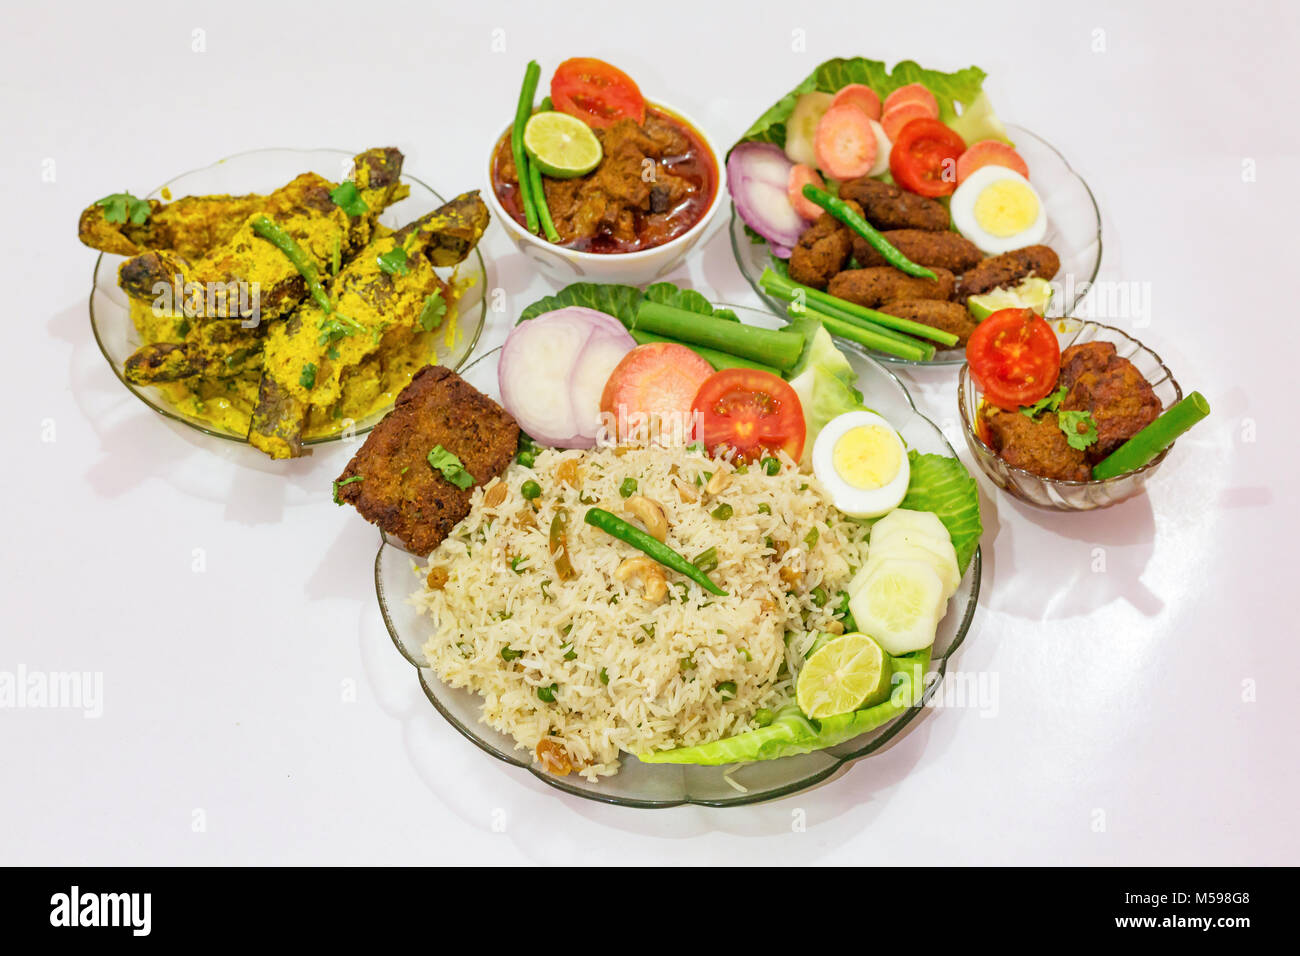 Popular Bengali Indian food dishes with fried rice, fish fingers, mutton masala curry and tangra fish curry garnished with salad. Stock Photo